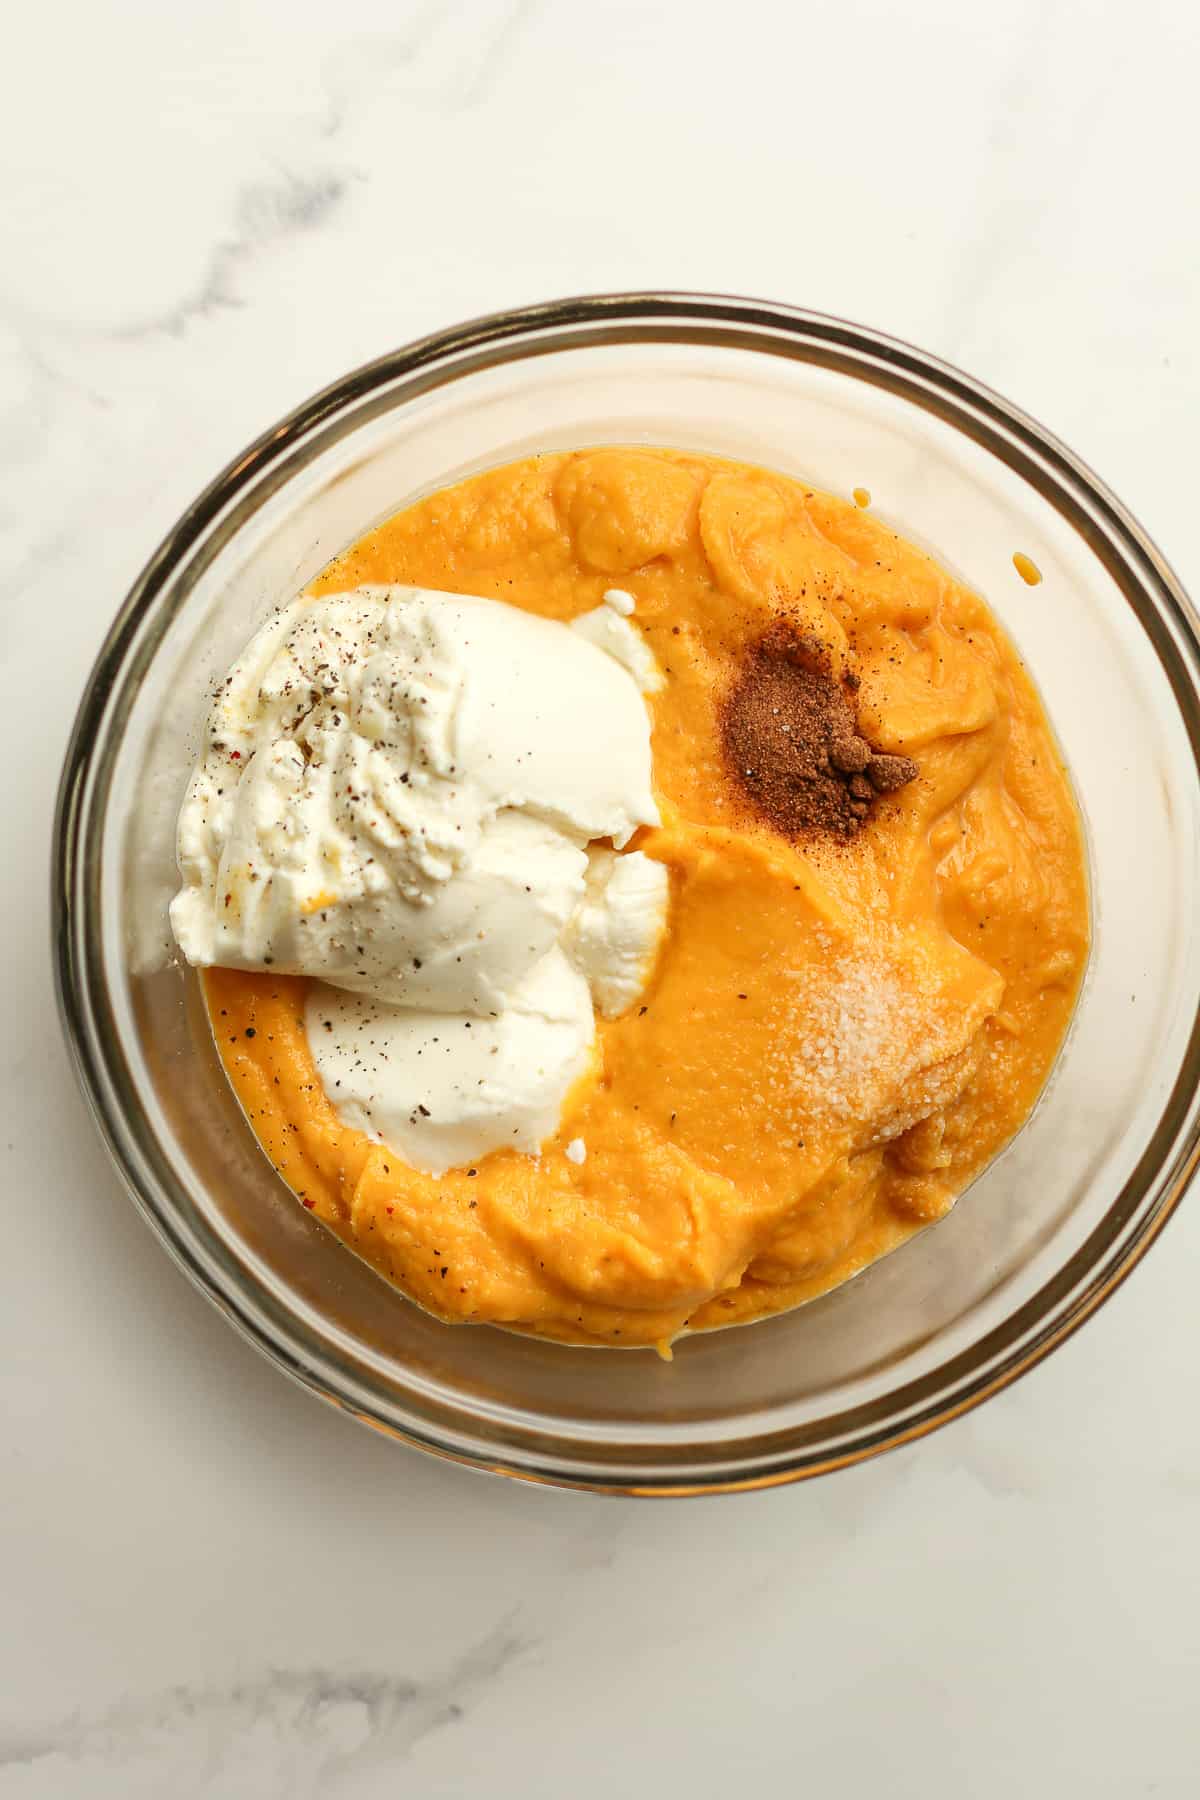 The squash puree with ricotta and seasonings on top.